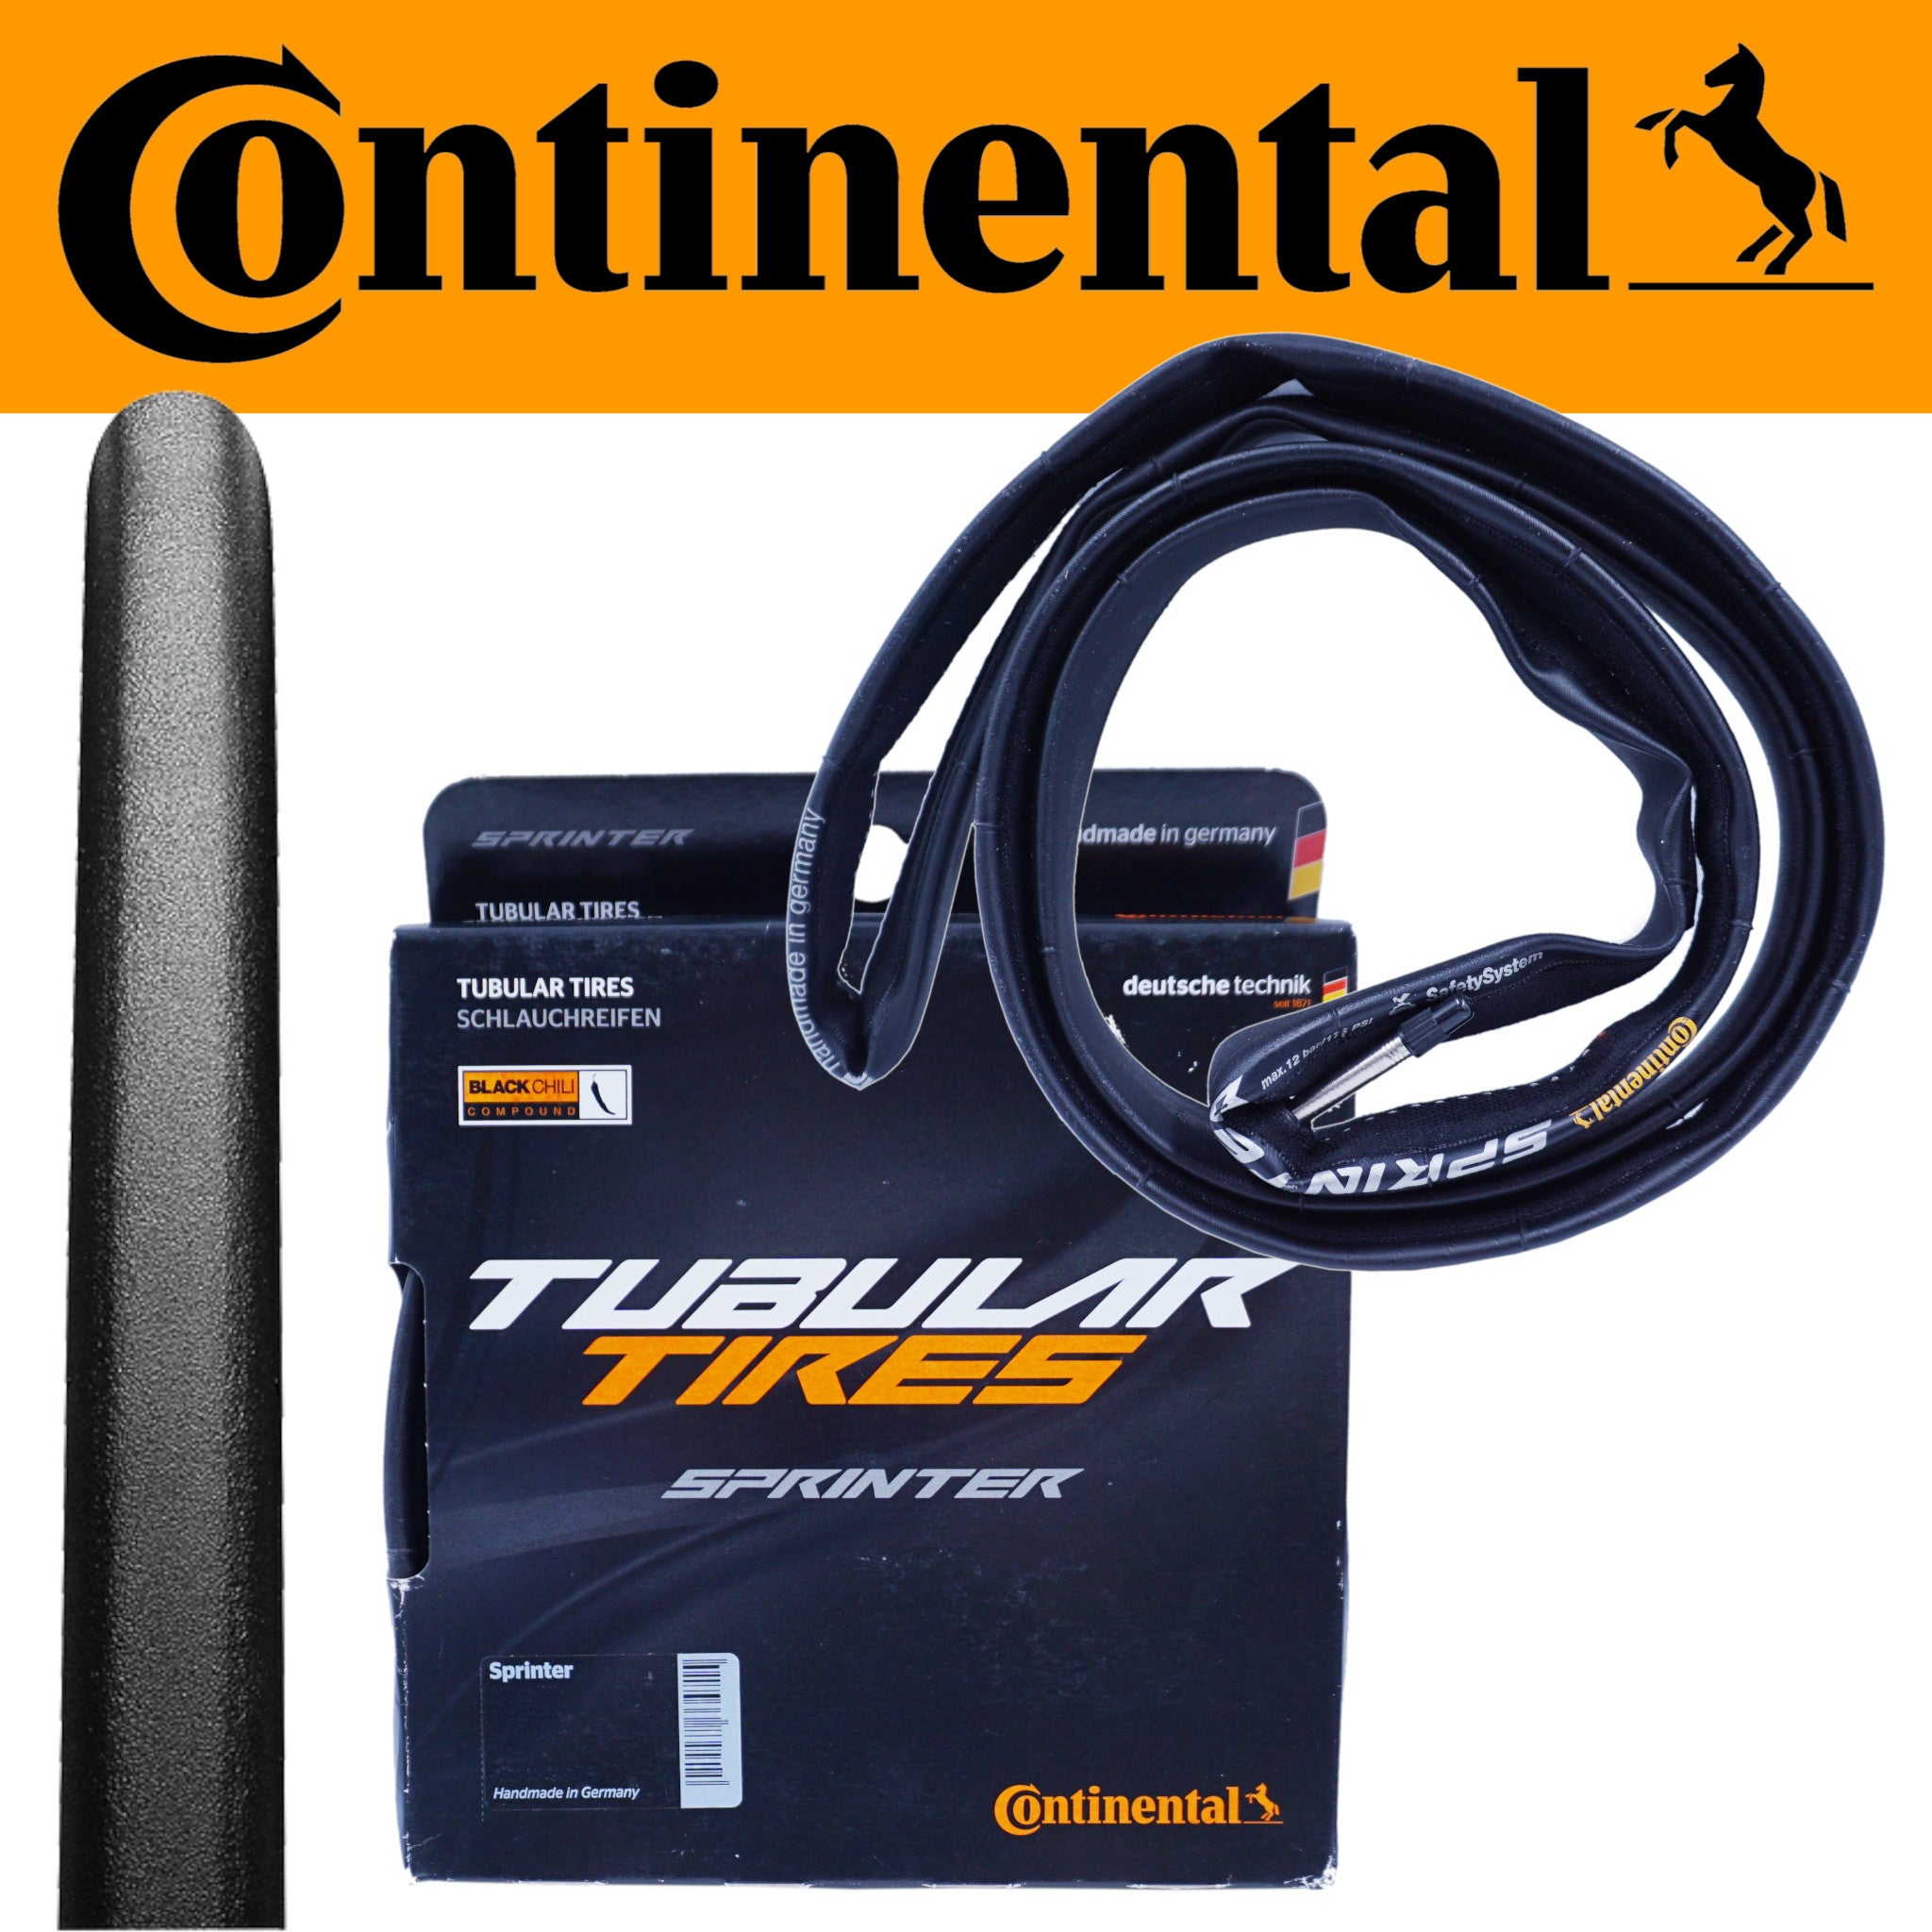 Continental Sprinter Tubular Tire 700C Puncture Protected Tire - The Bikesmiths